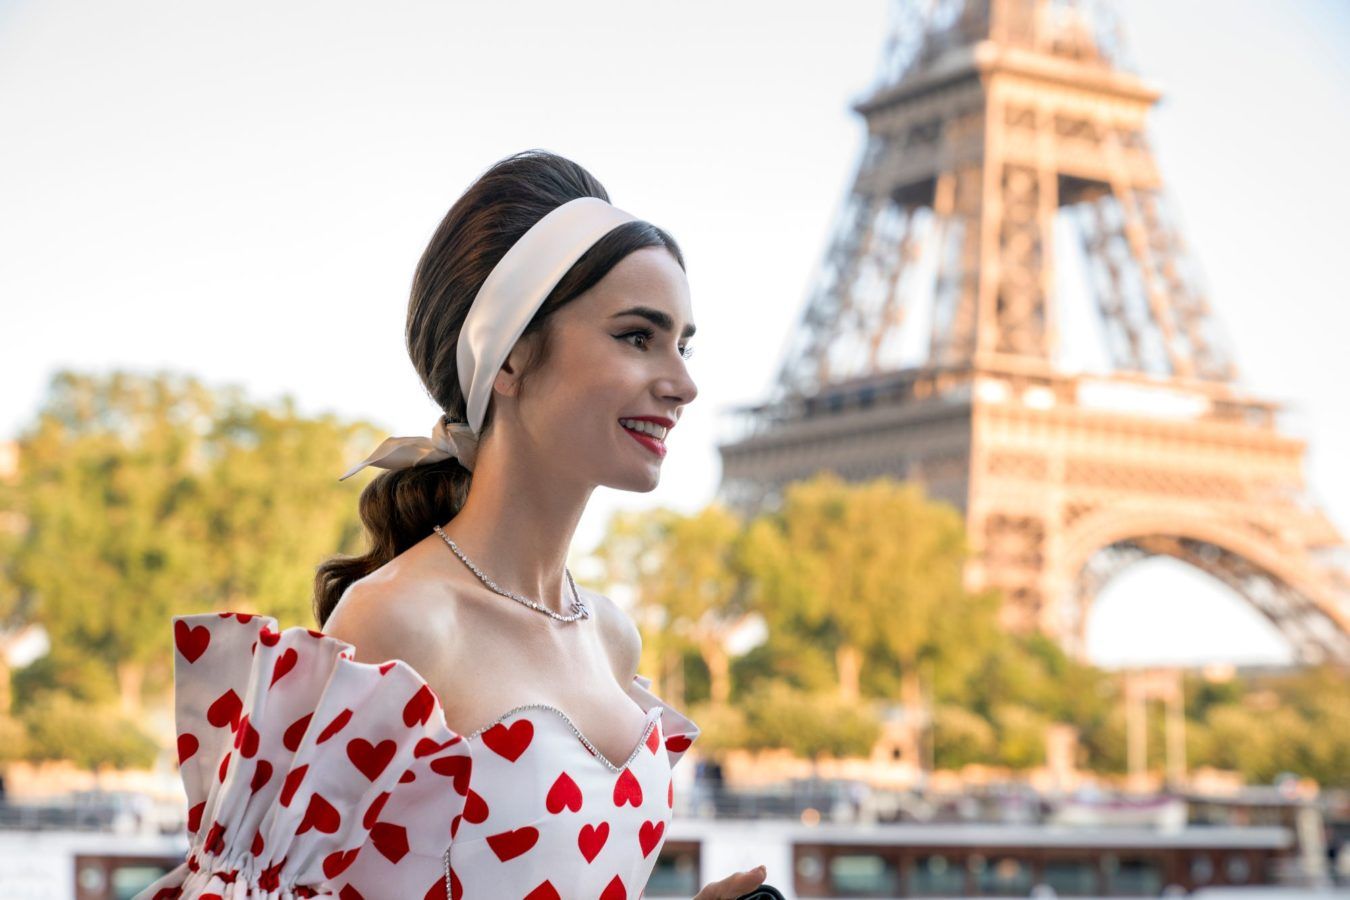 Bonjour! ‘Emily In Paris’ will return for seasons 3 and 4 on Netflix